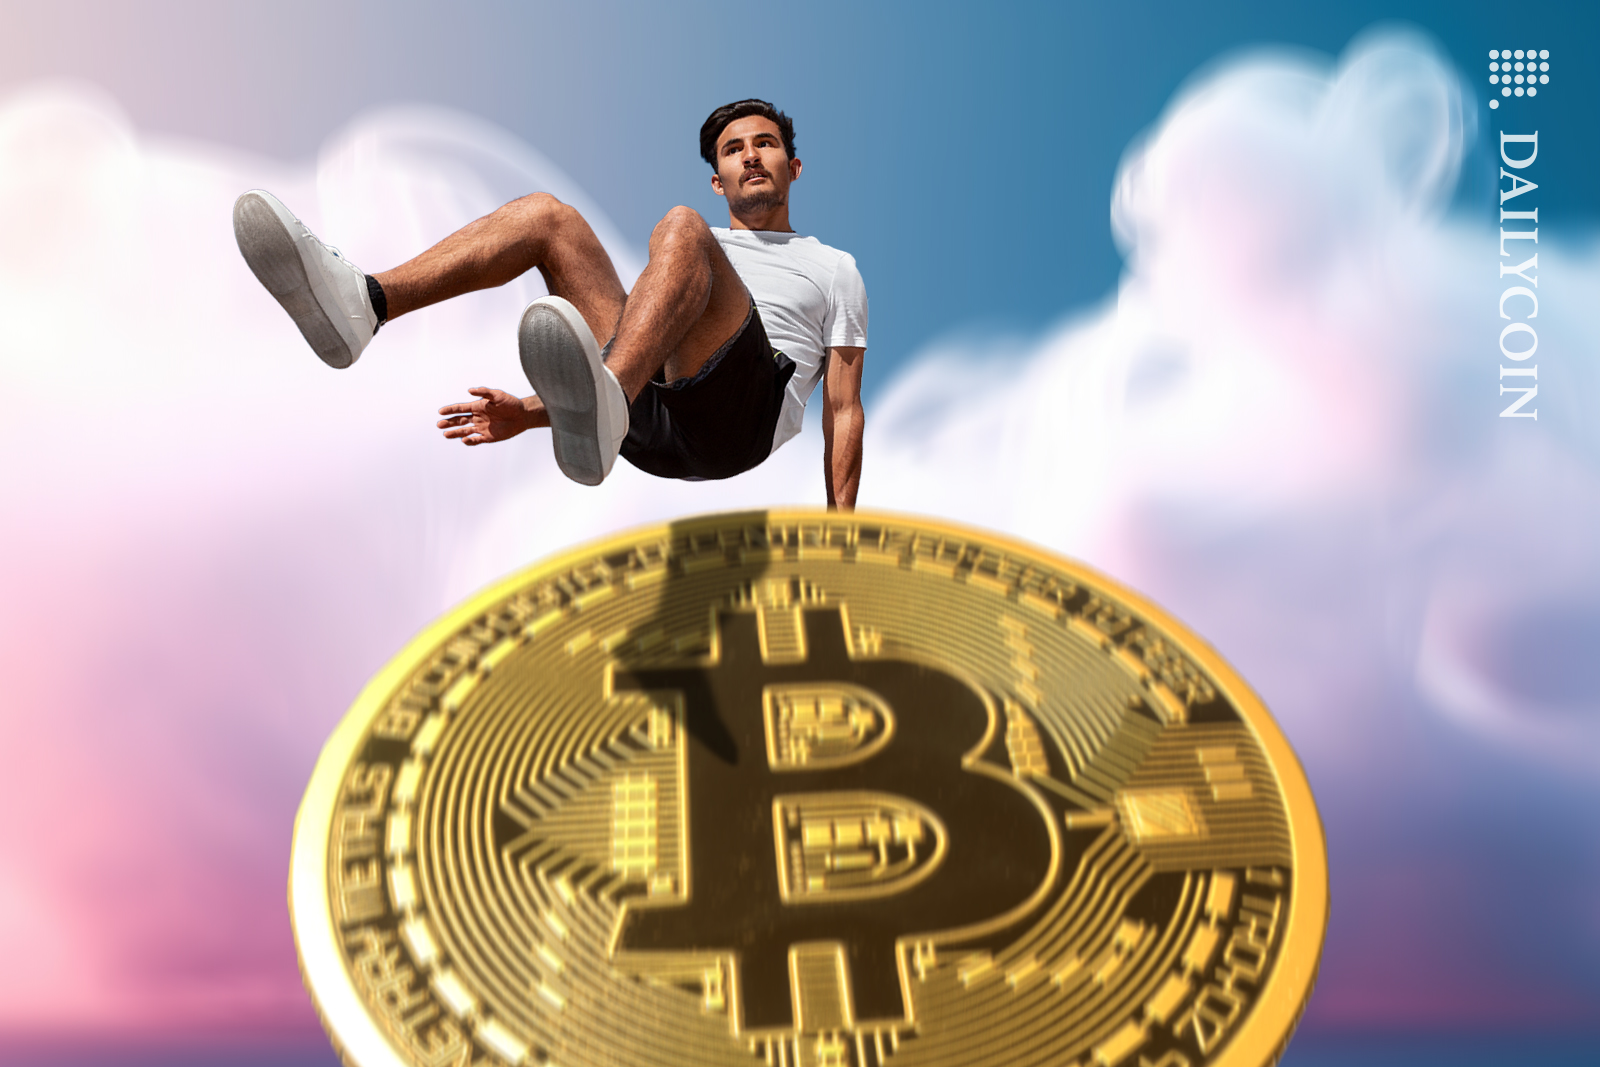 Guy in the sky jumping over Bitcoin.